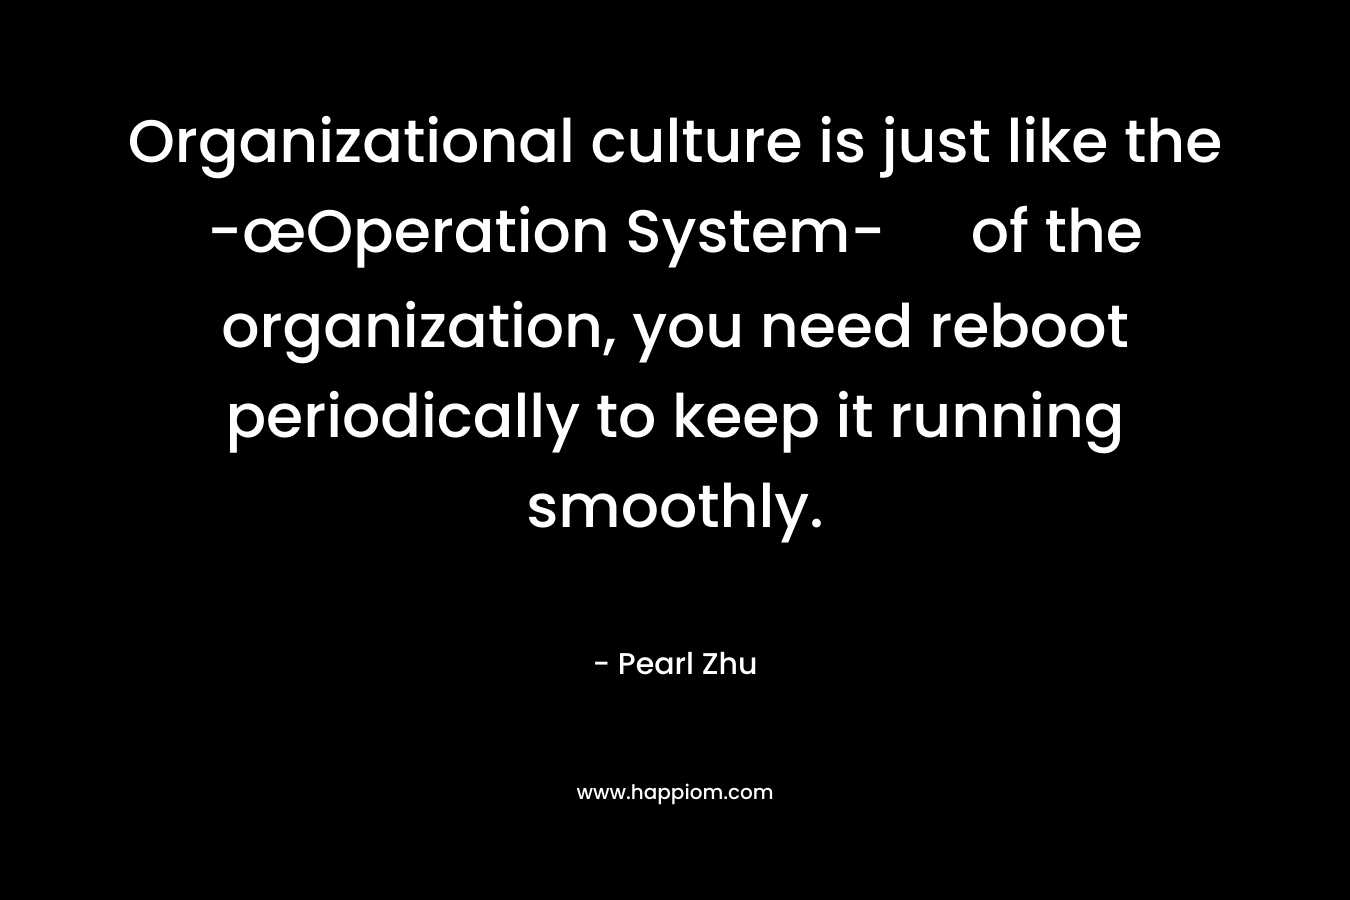 Organizational culture is just like the -œOperation System- of the organization, you need reboot periodically to keep it running smoothly. – Pearl Zhu